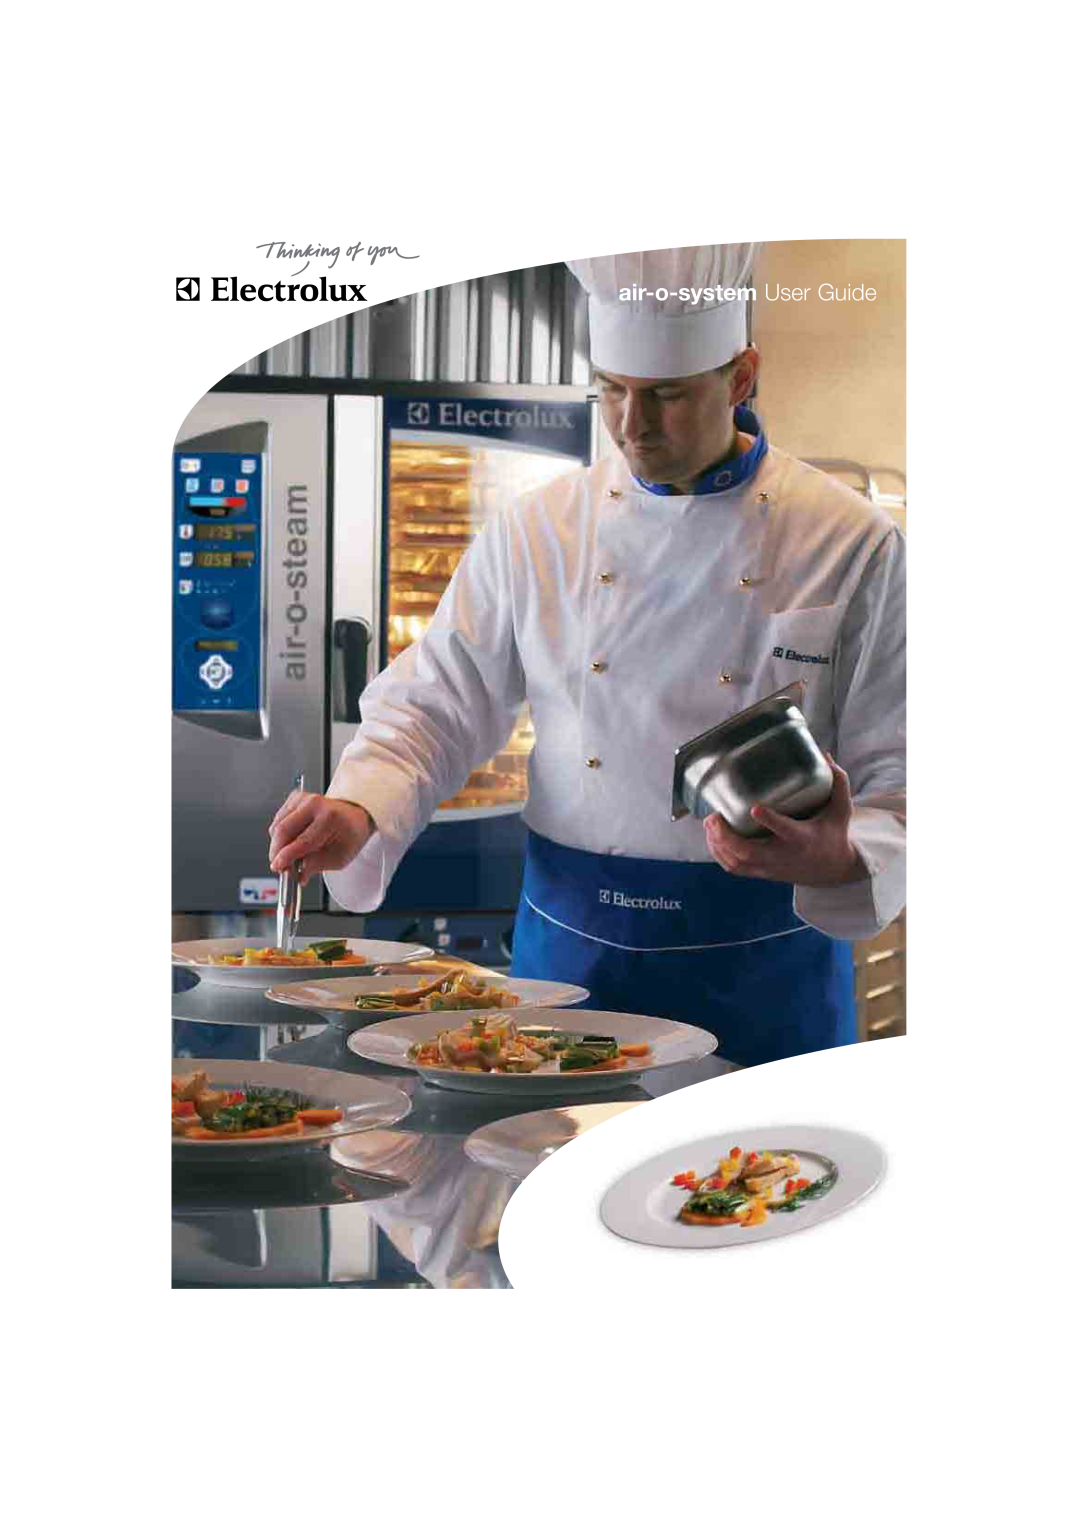 Electrolux 180 manual air-o-system User Guide 